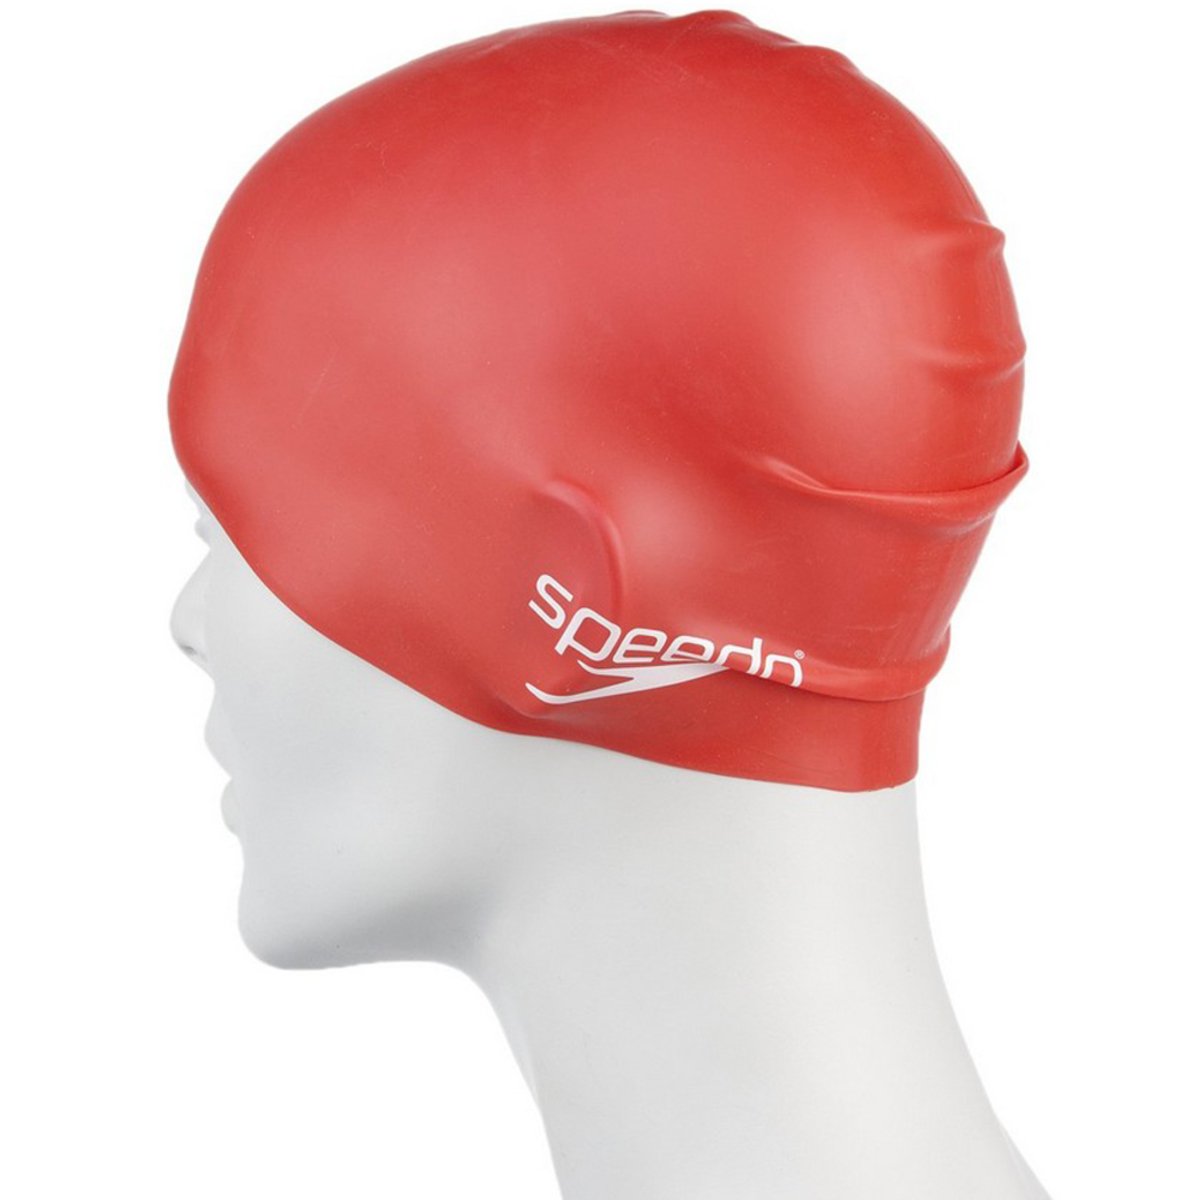 Speedo Kids Plain Moulded Silicone Cap Red